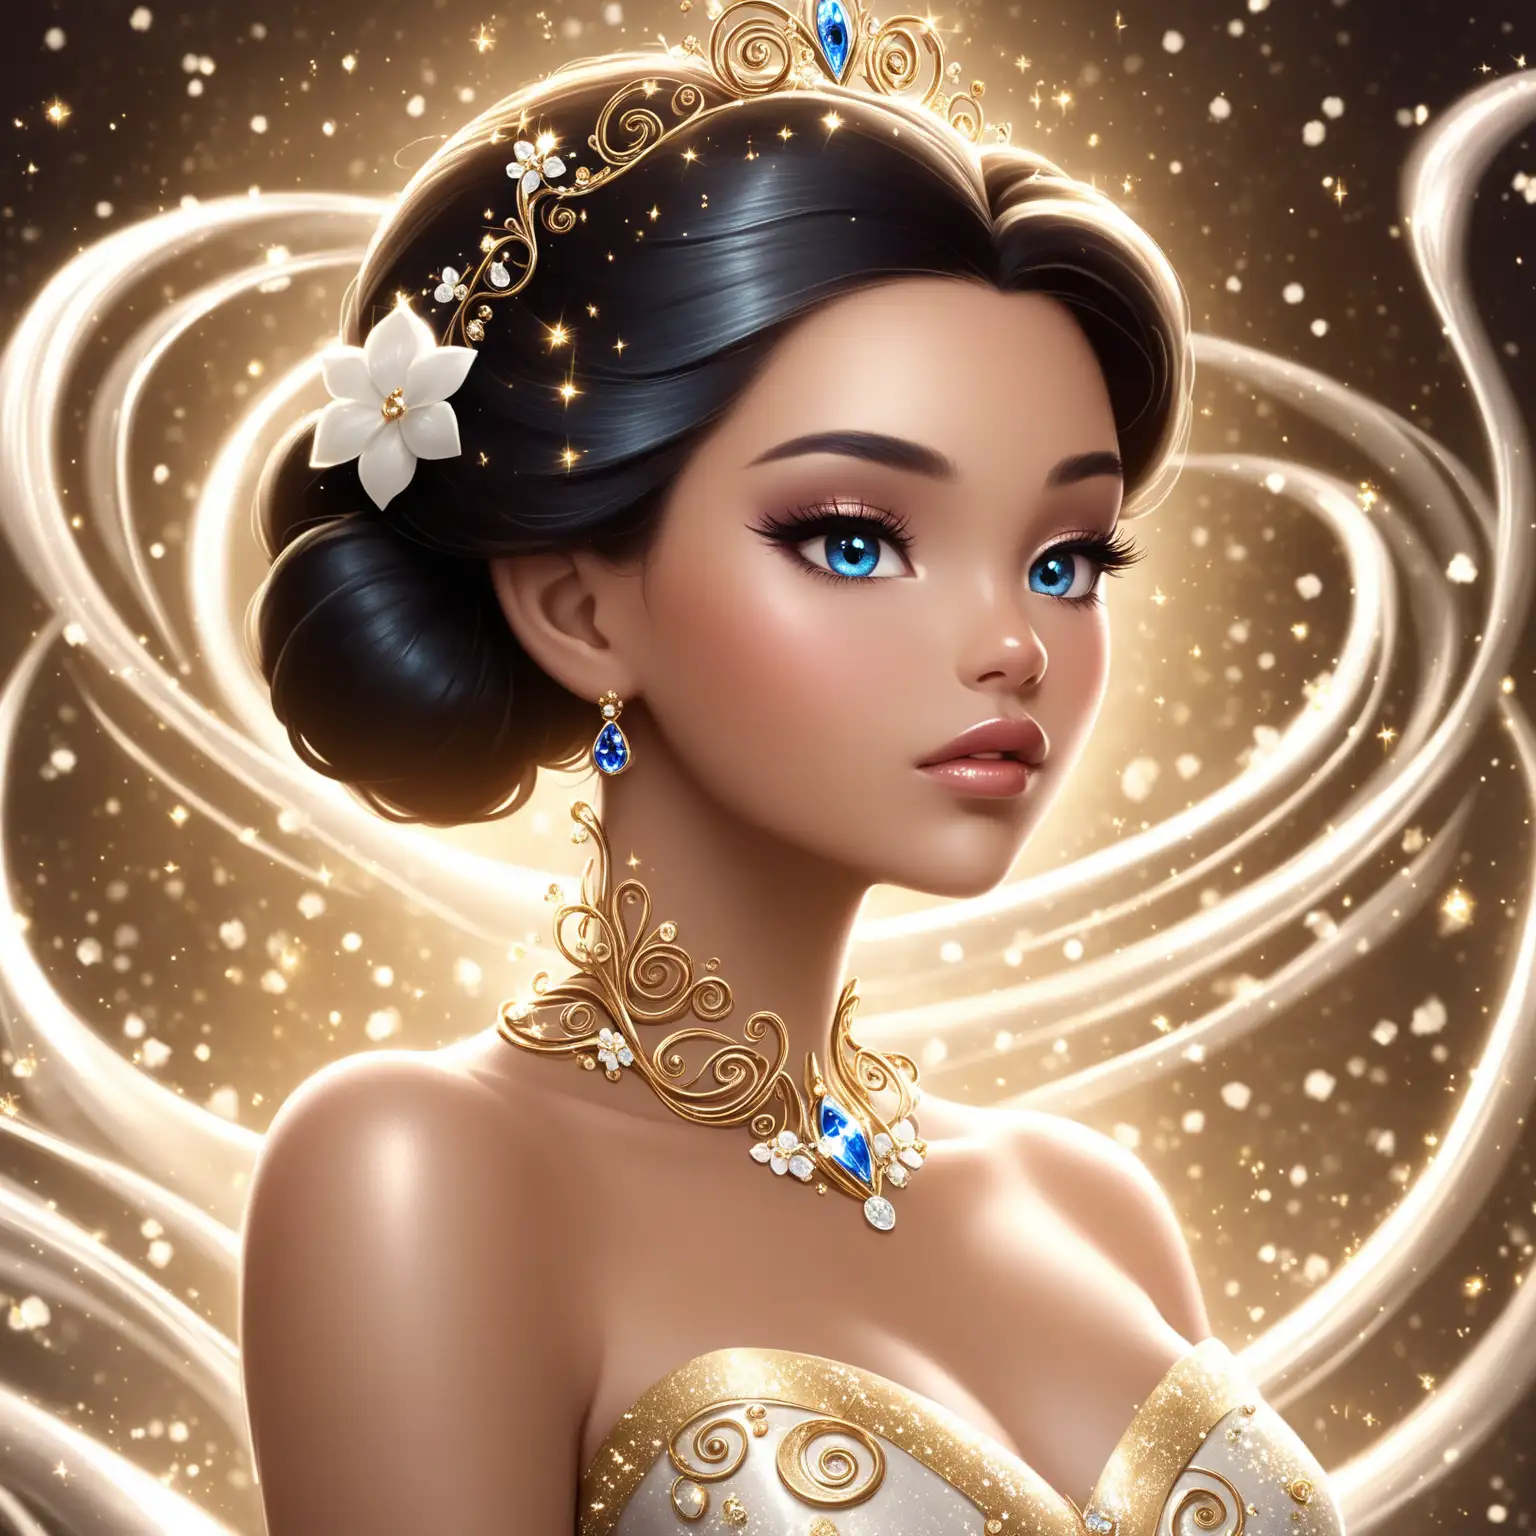 Beautiful Disney princess, full lips, long  hair up in a sleek bun, princess gown, jewelry, glossy make up, white  flowers, magic swirls, gold sparks, cinched waist, close up